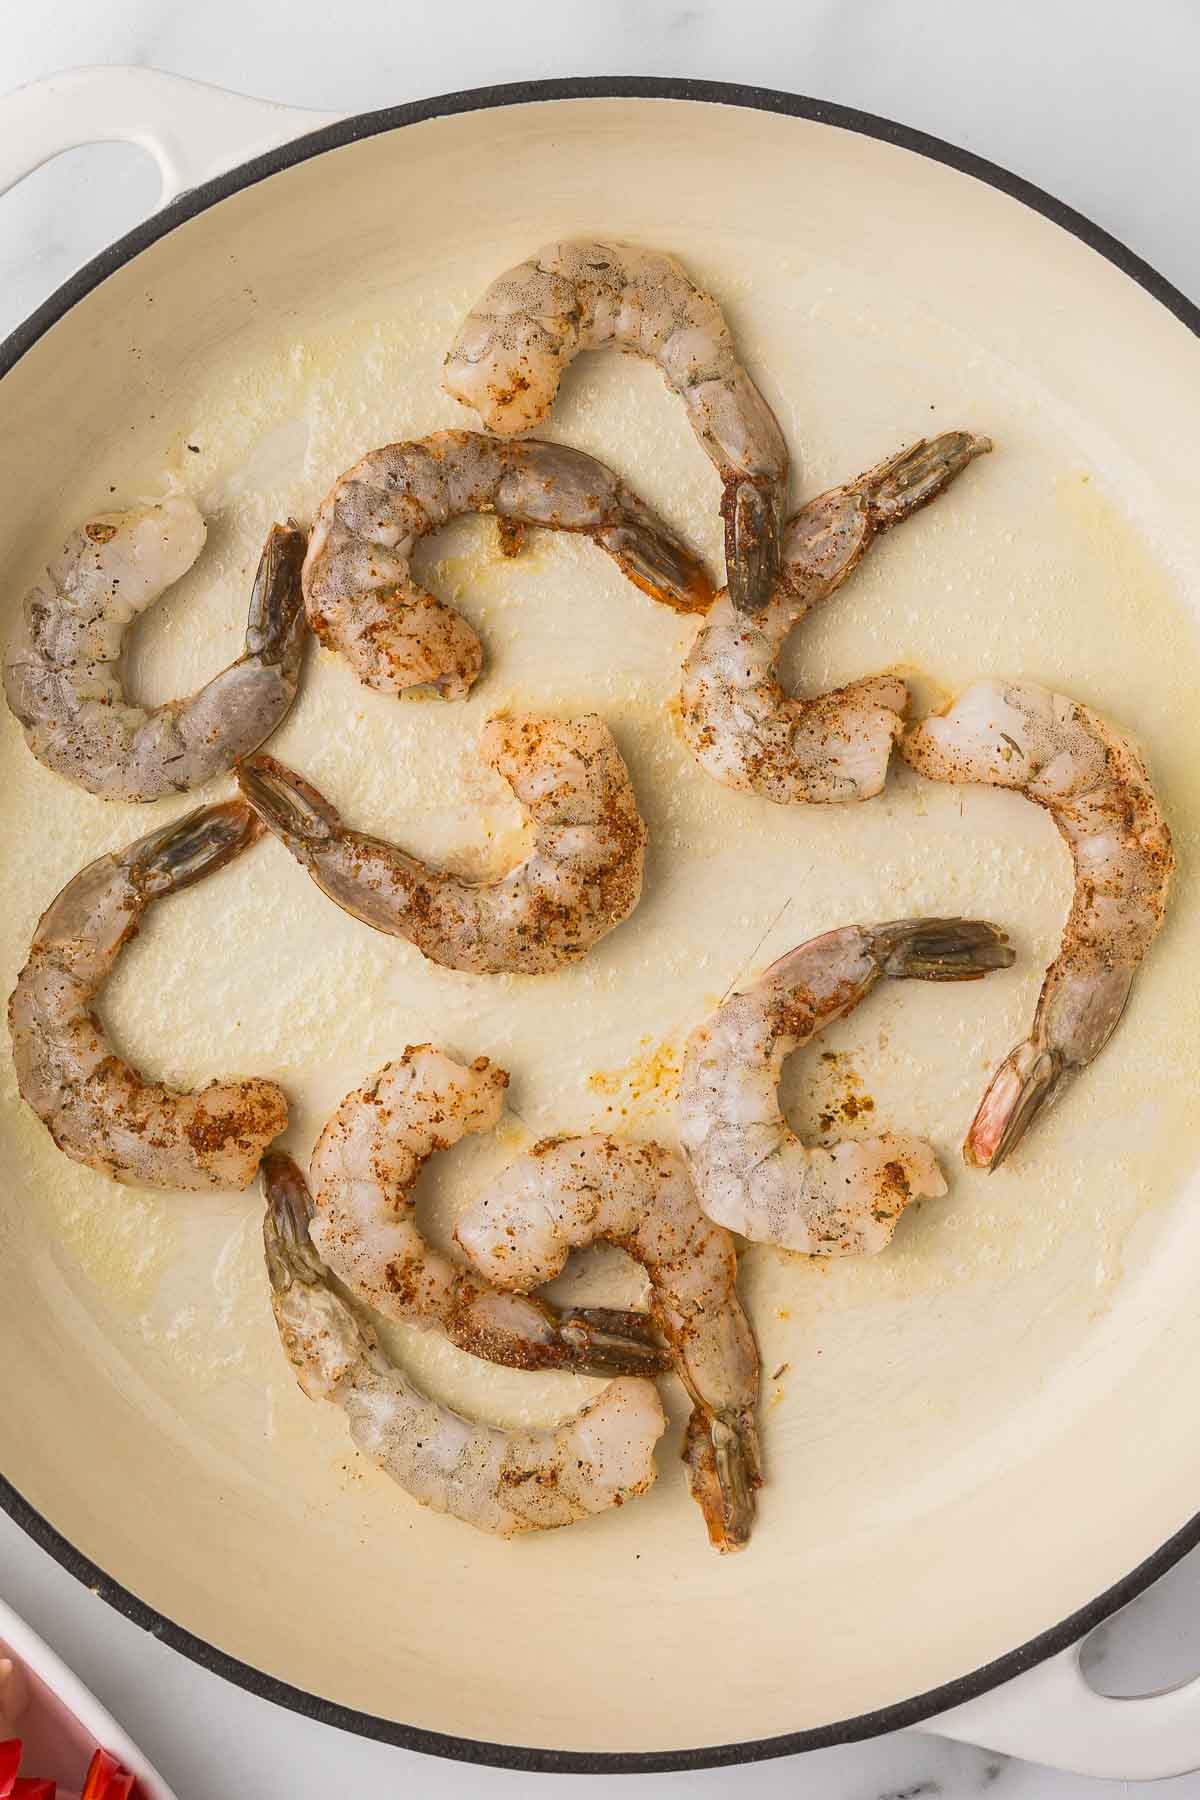 Shrimp in a pan with oil and cajun seasoning.